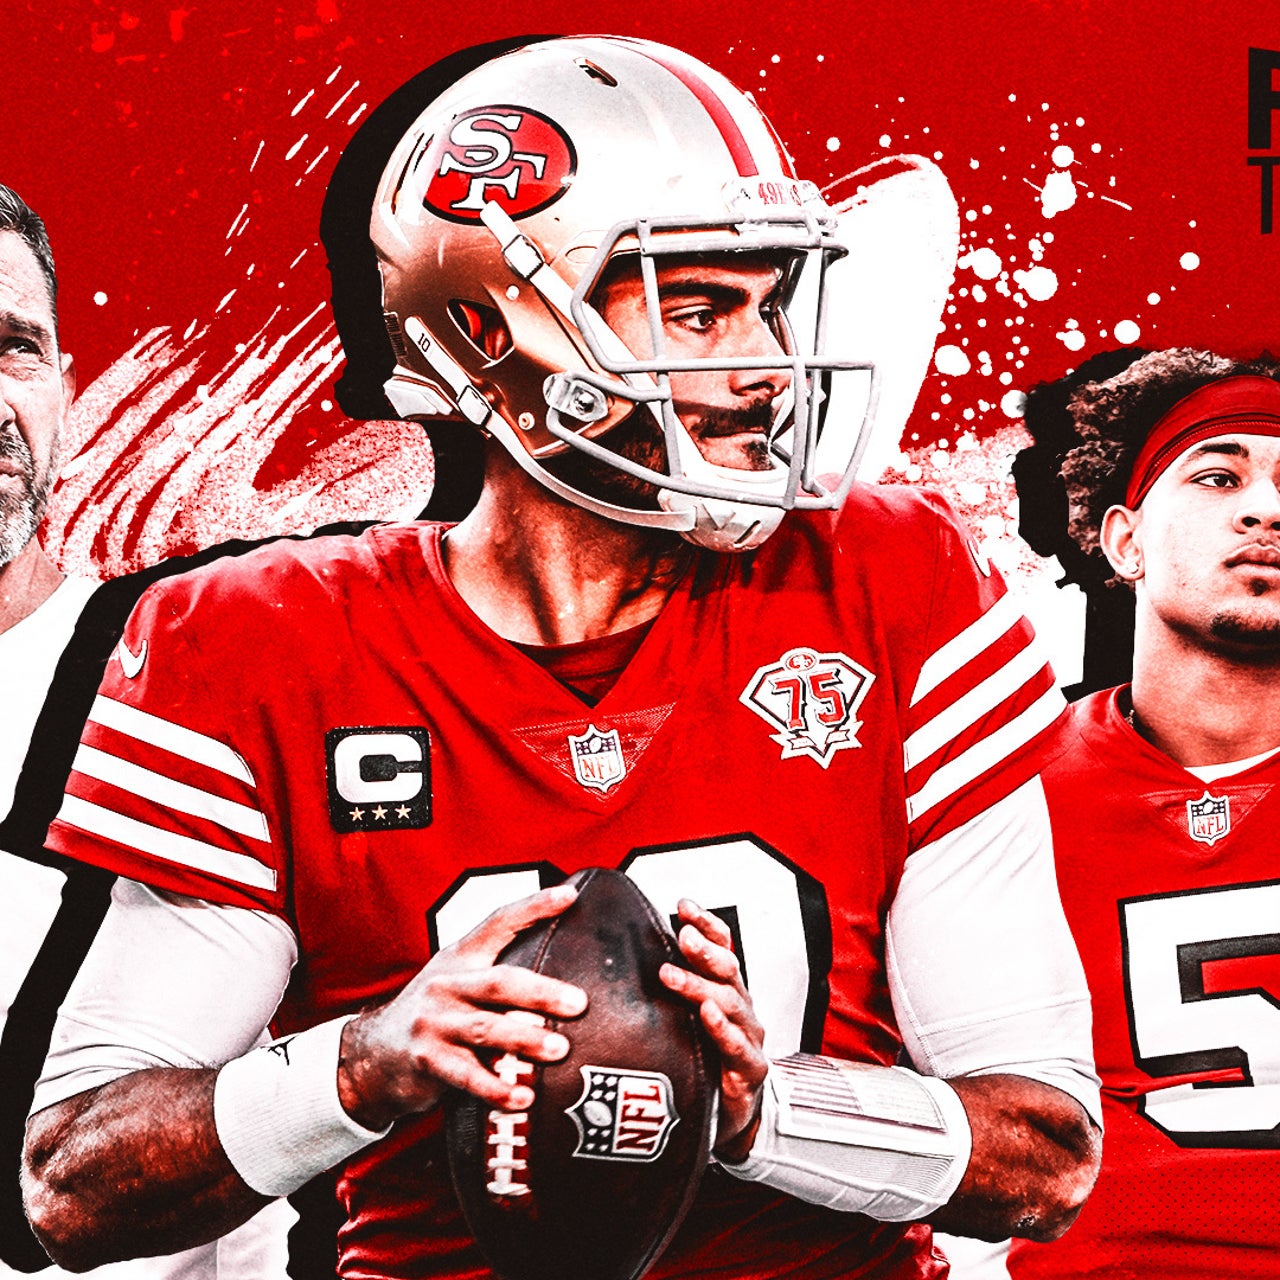 Is it time for the 49ers to bench Jimmy Garoppolo?